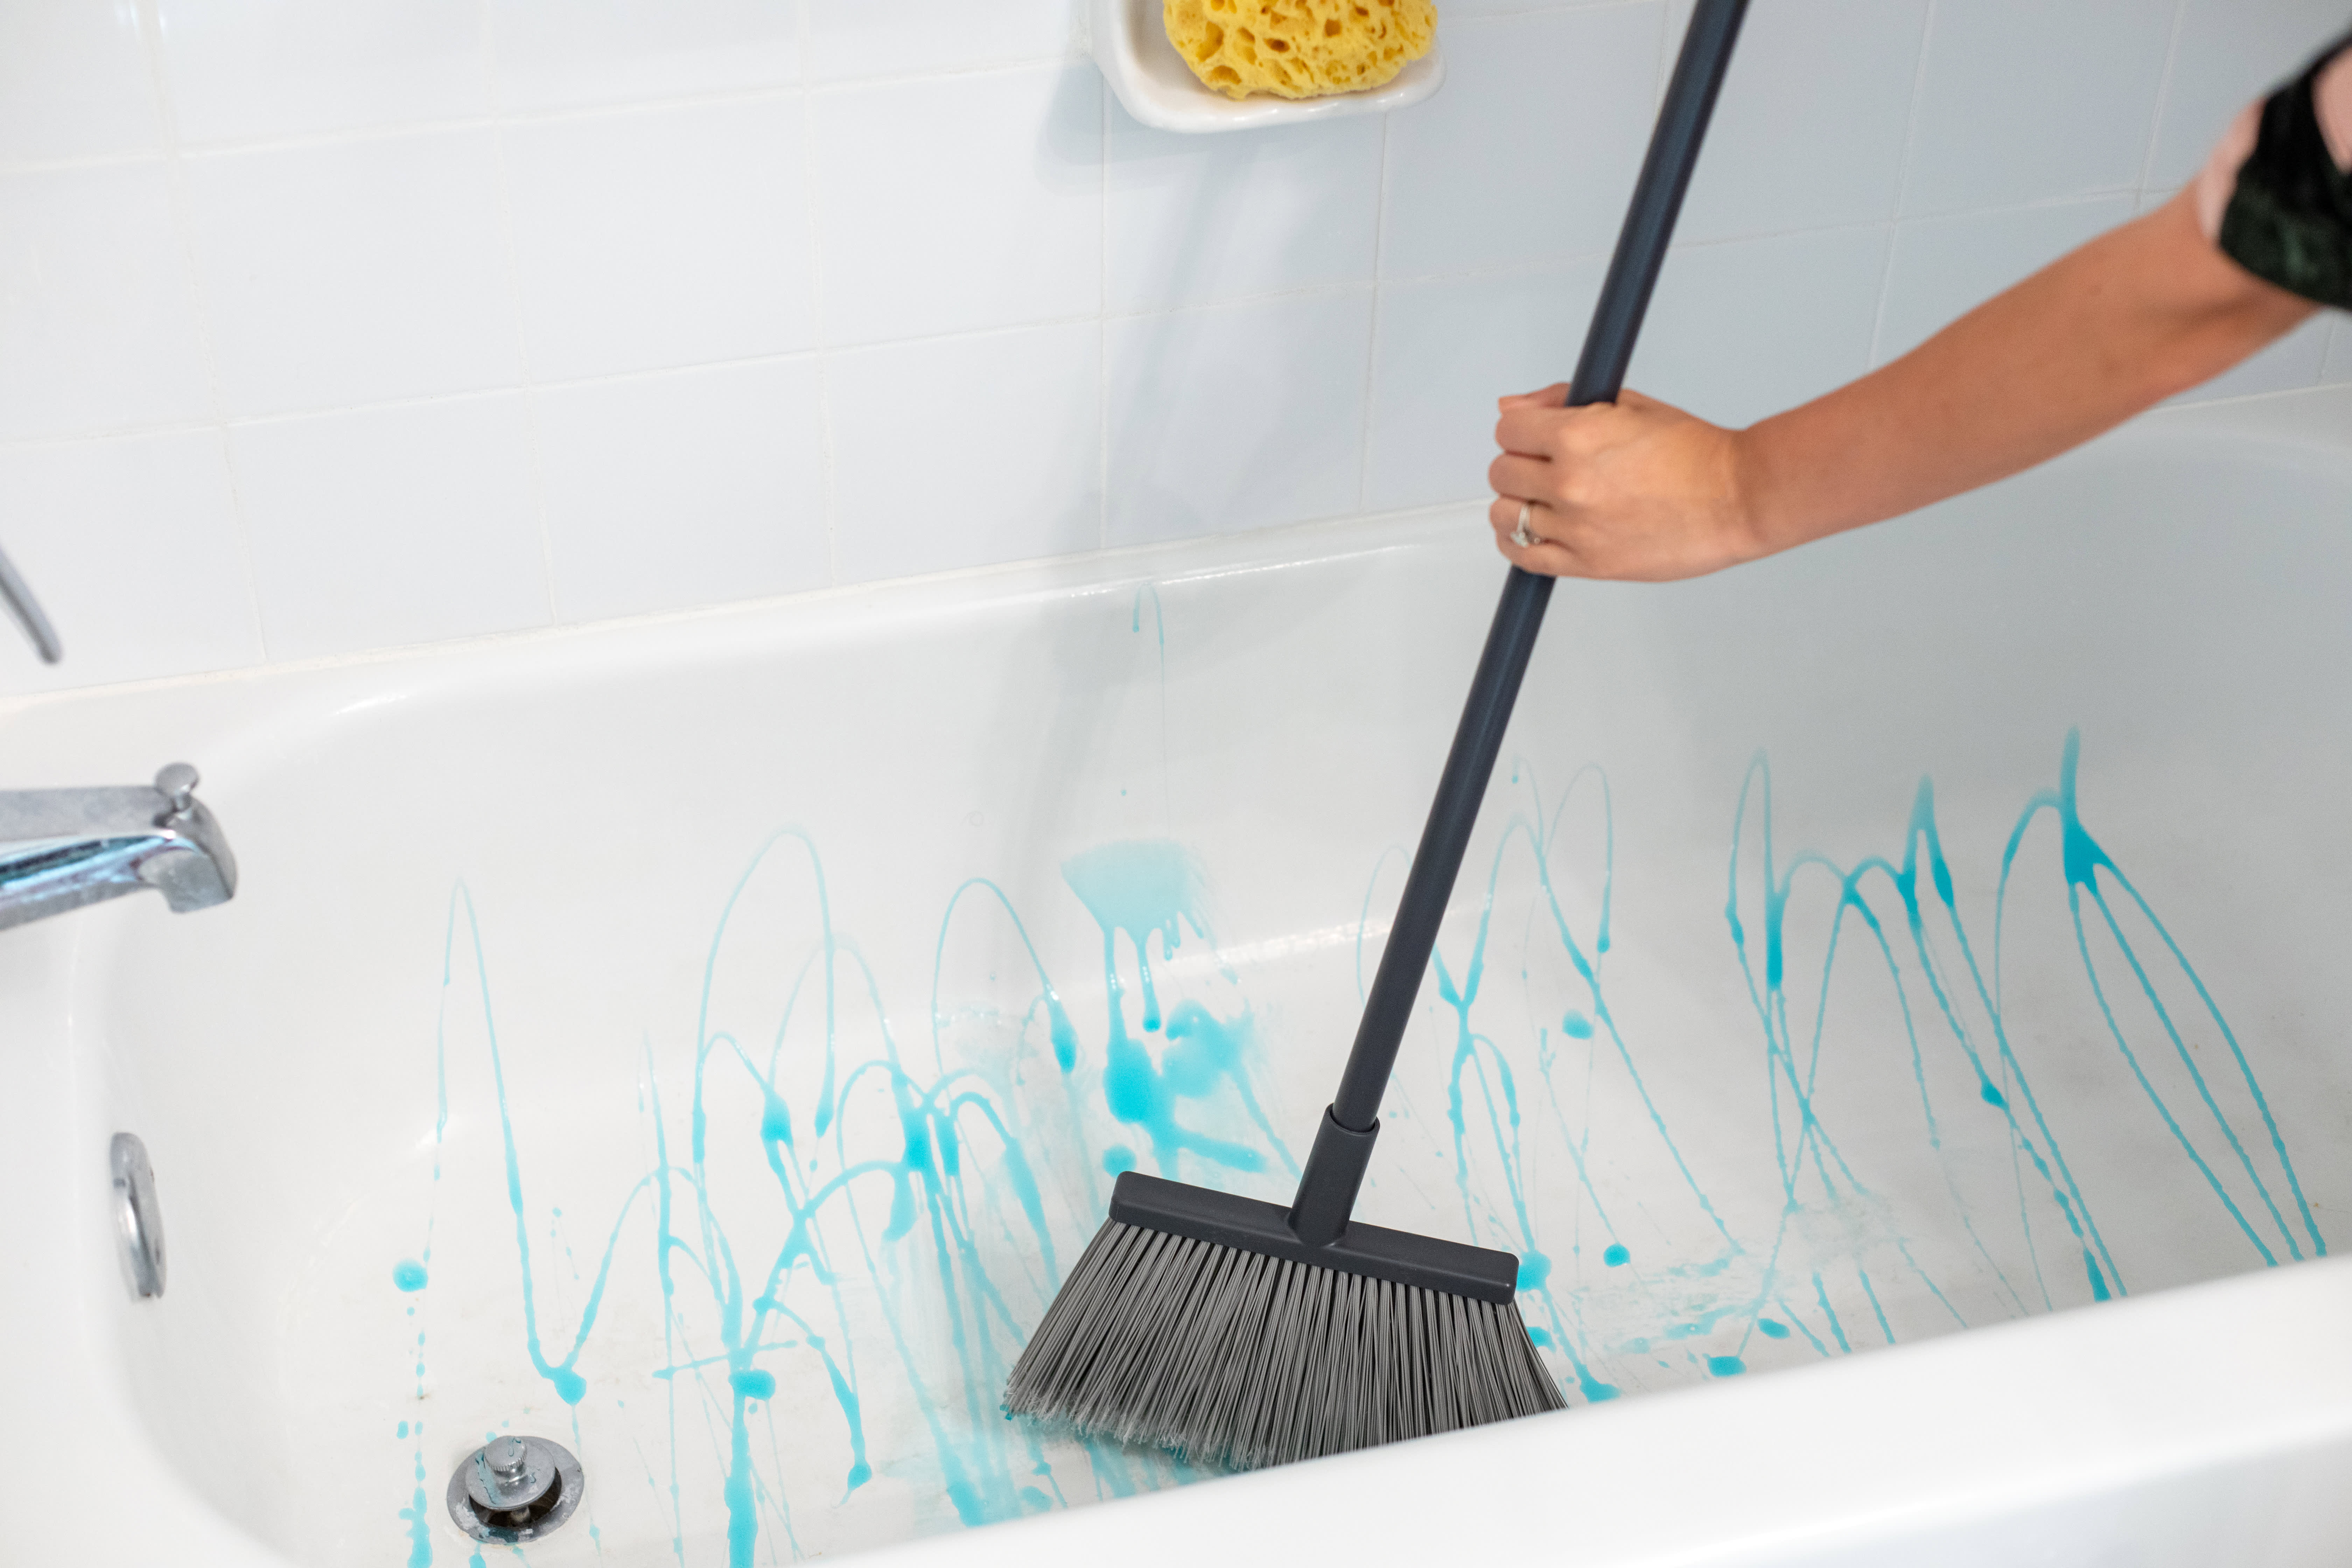 https://cdn.apartmenttherapy.info/image/upload/v1568128329/k/Photo/Lifestyle/2019-09-the-best-way-to-clean-your-bathtub-is-with-liquid-dish-soap/The_Best_Way_To_Clean_Your_Bathtub_is_with_Liquid_Dish_Soap_Shot_2.jpg